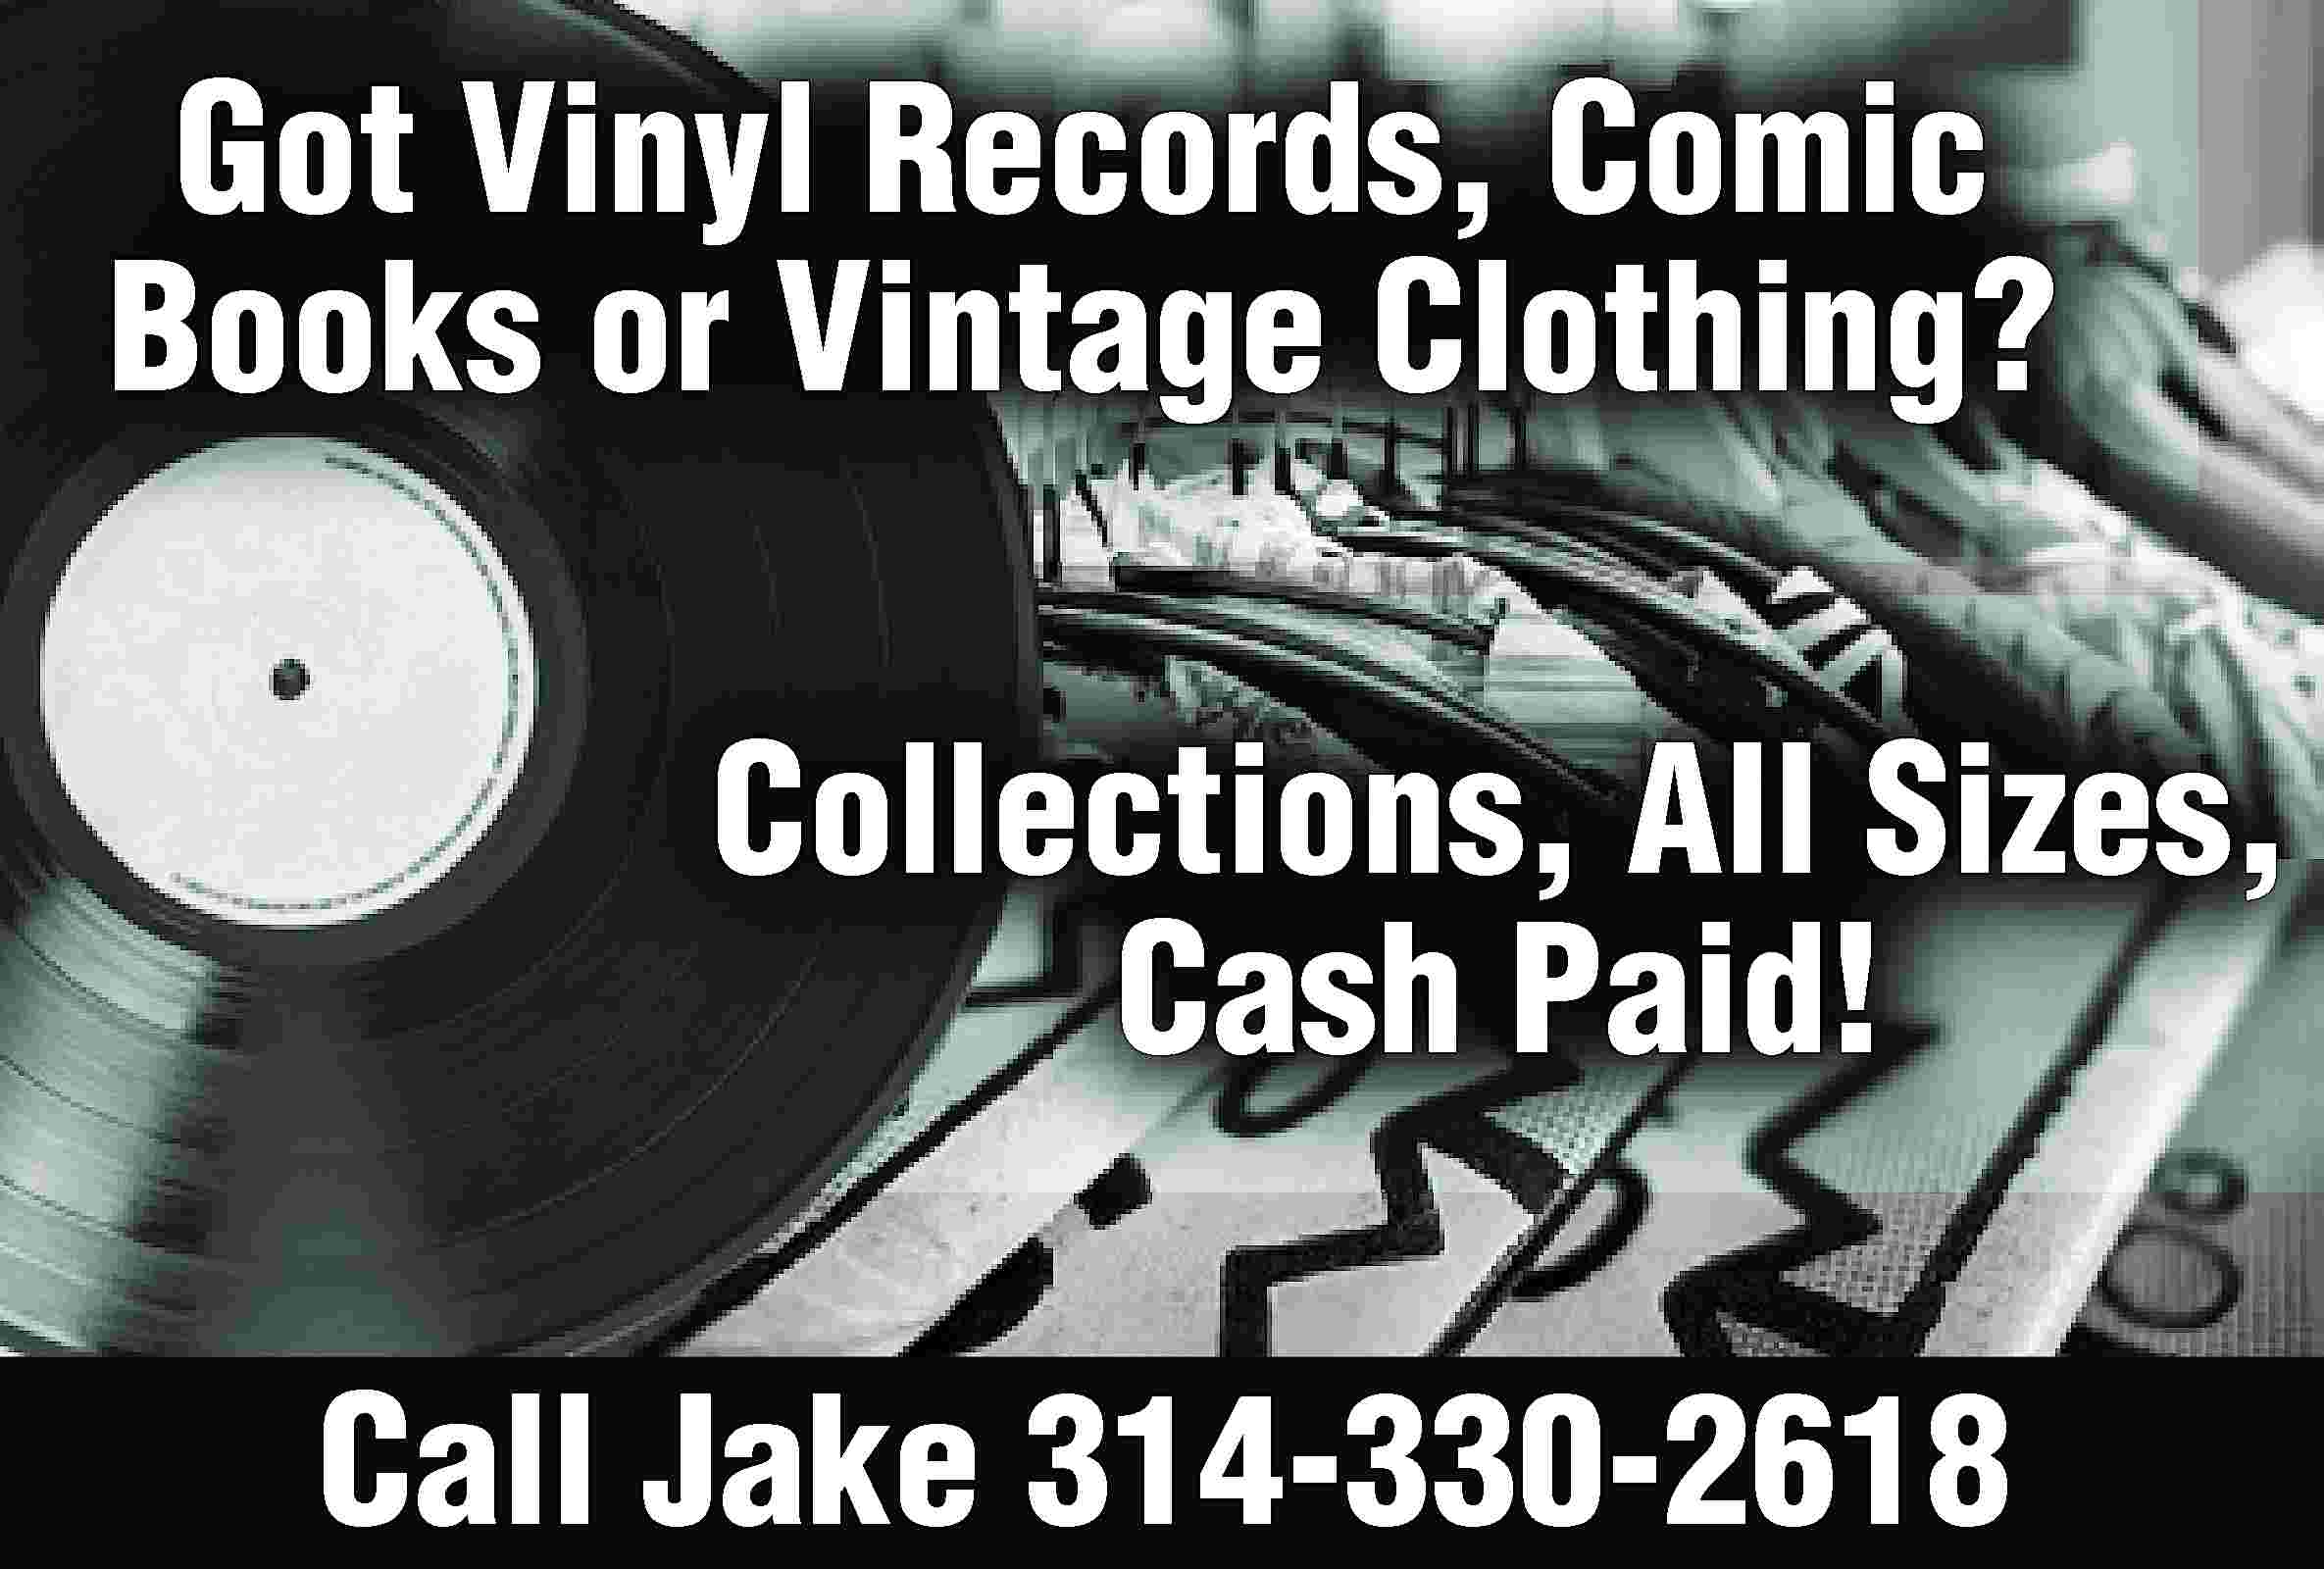 Got Vinyl Records, Comic Books  Got Vinyl Records, Comic Books or Vintage Clothing? Collections, All Sizes, Cash Paid! Call Jake 314-330-2618